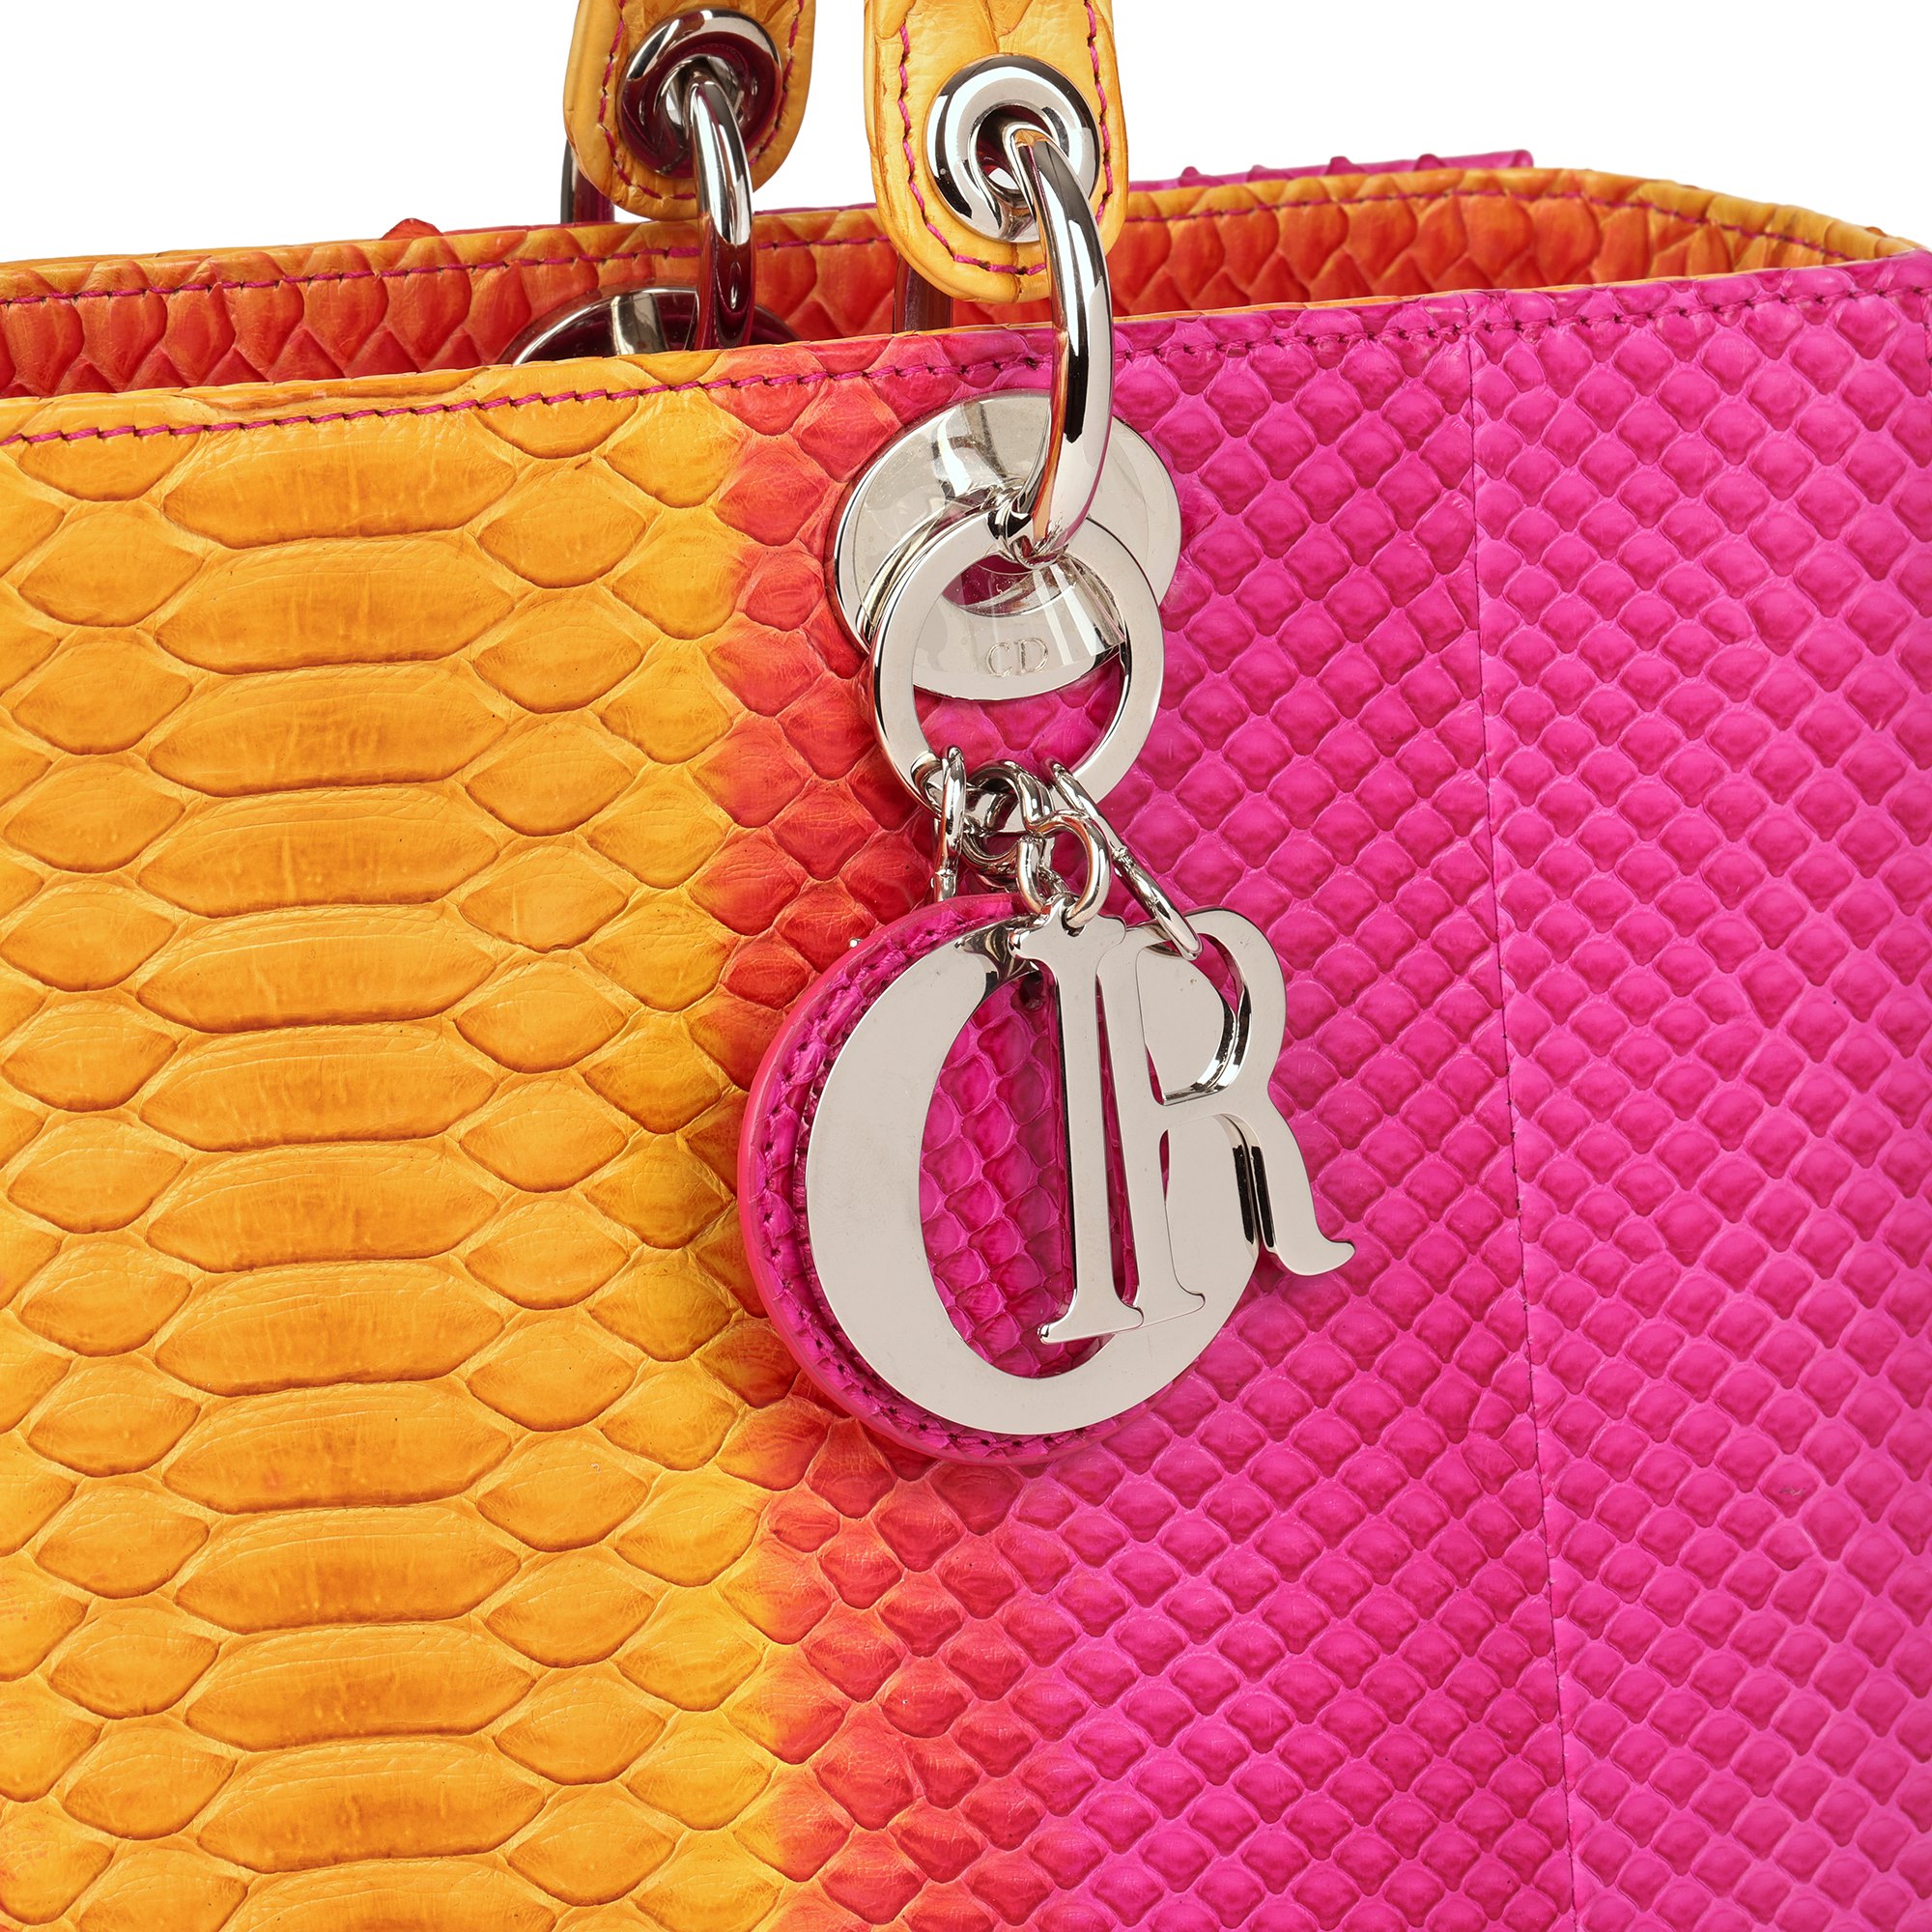 Christian Dior Pink & Orange Ombre Python Leather Lady Dior GM